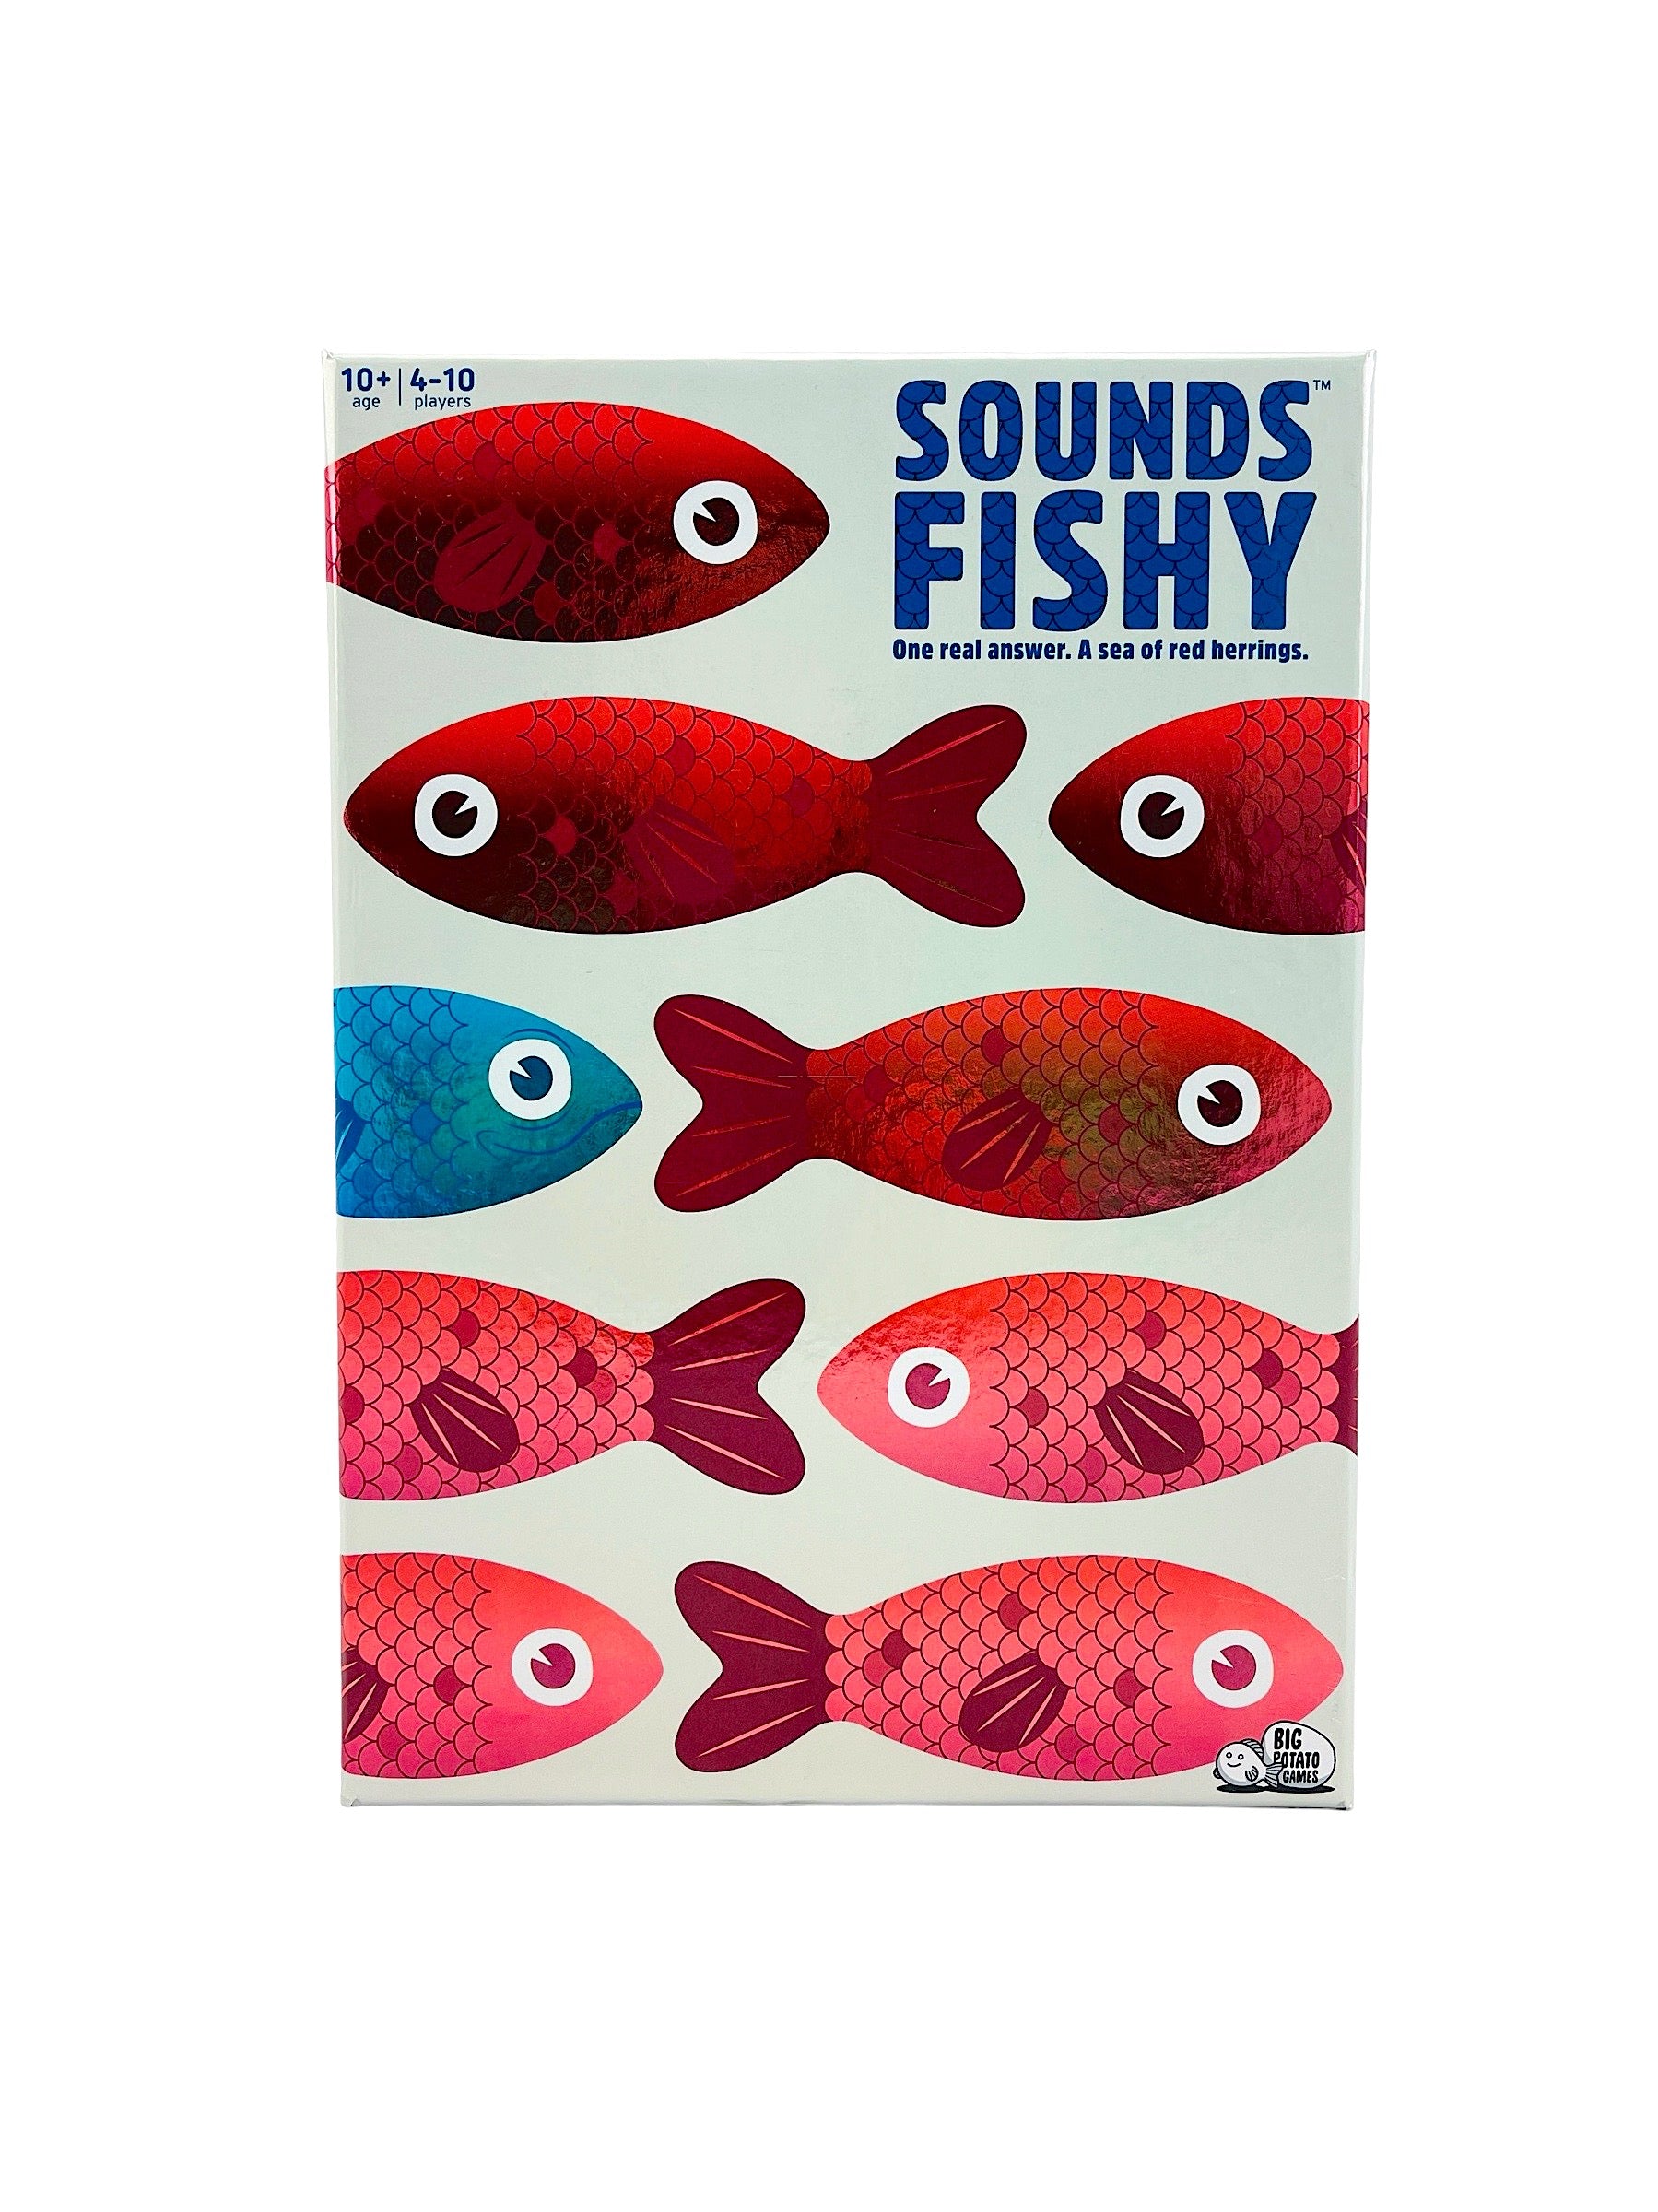 the Sounds Fishy box on a white background